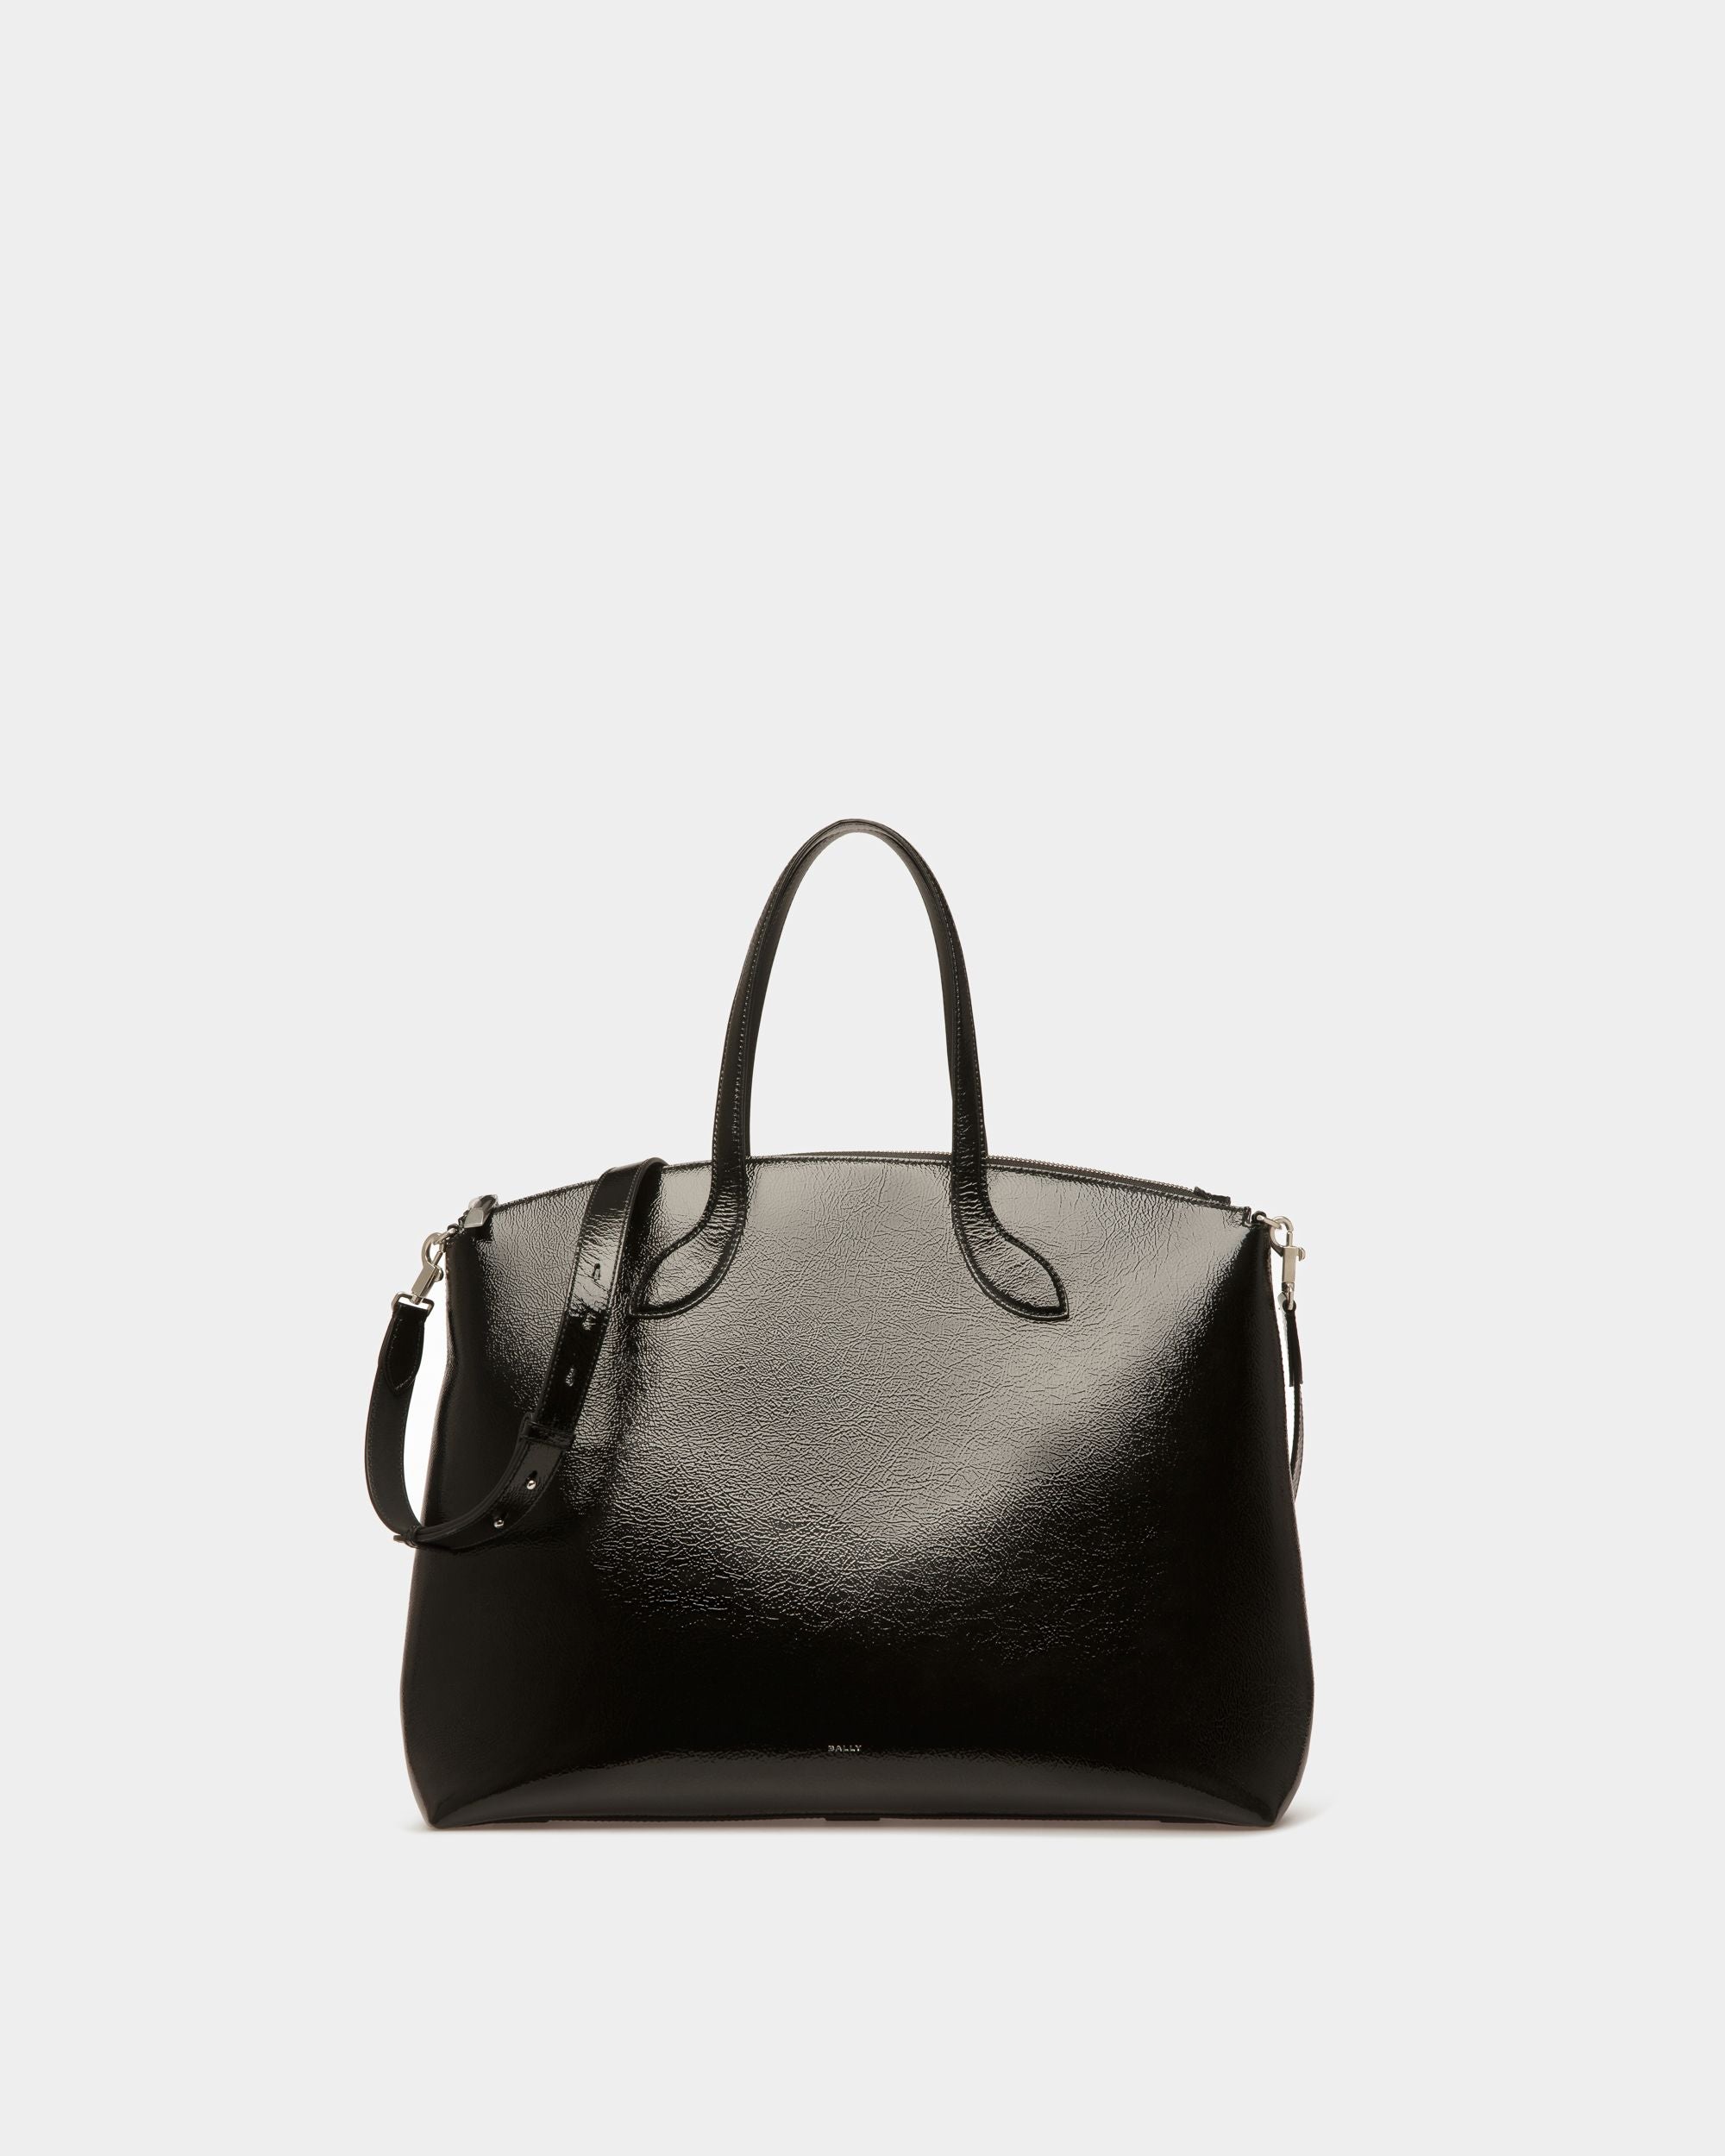 Shaped | Women's Totes | Black Leather | Bally | Still Life Front